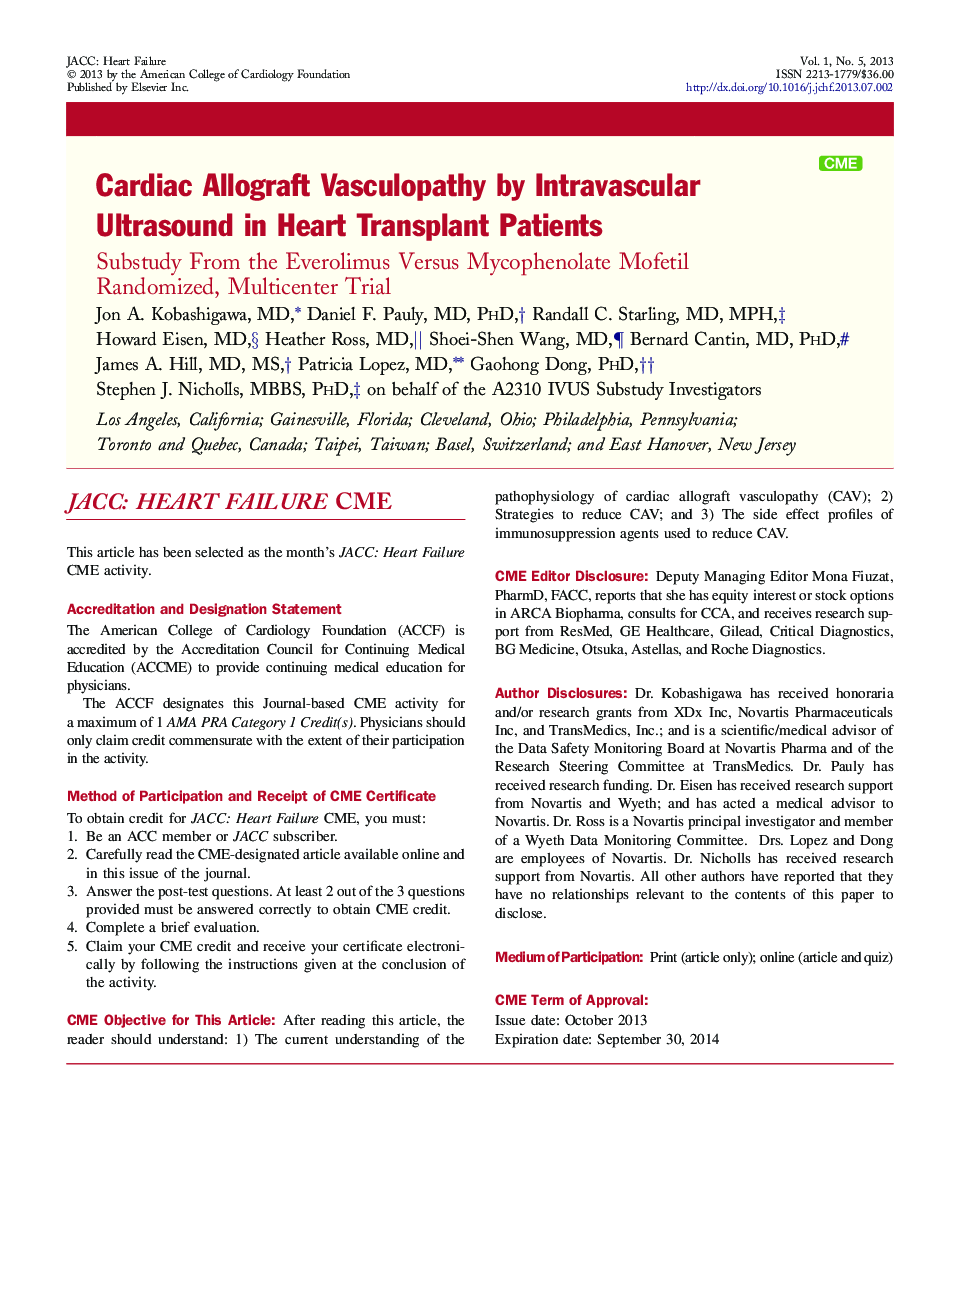 Cardiac Allograft Vasculopathy by Intravascular Ultrasound in Heart Transplant Patients : Substudy From the Everolimus Versus Mycophenolate Mofetil Randomized, Multicenter Trial